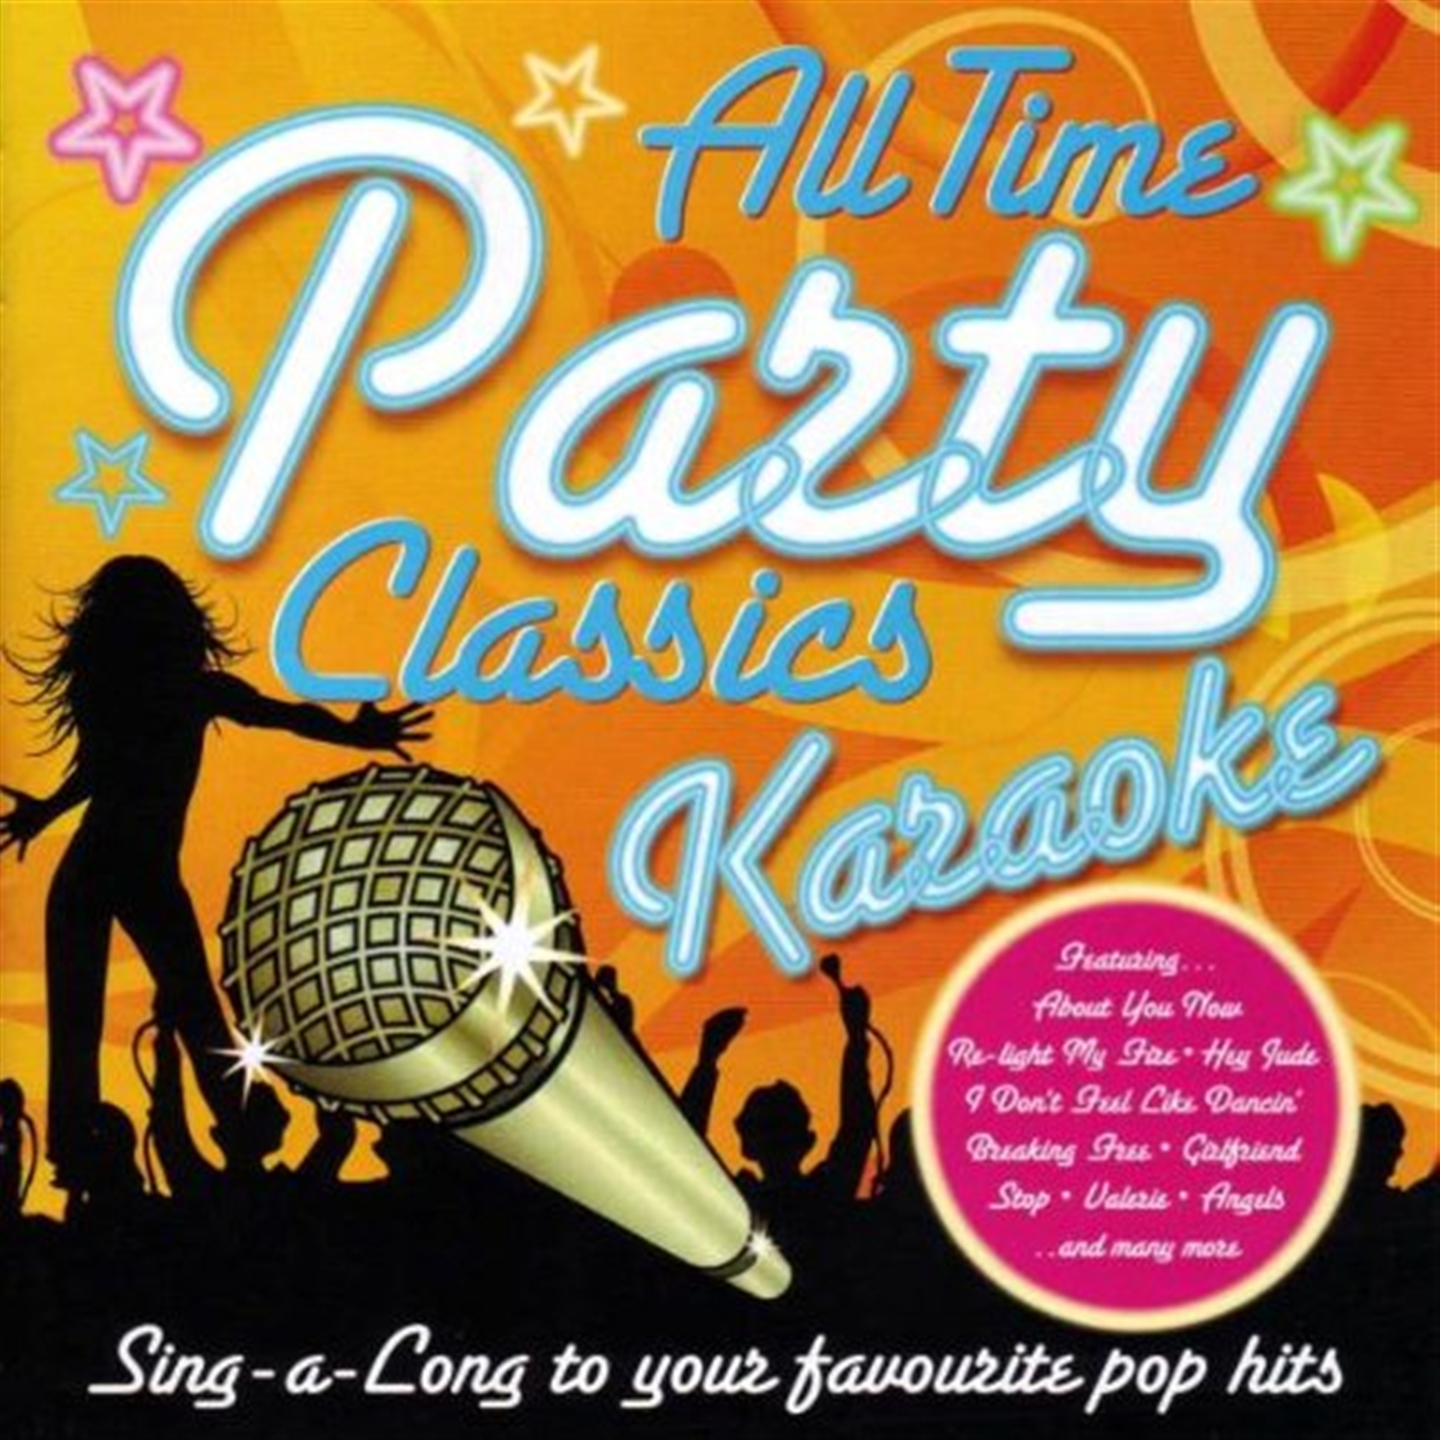 ALL TIME PARTY CLASSICS KARAOKE